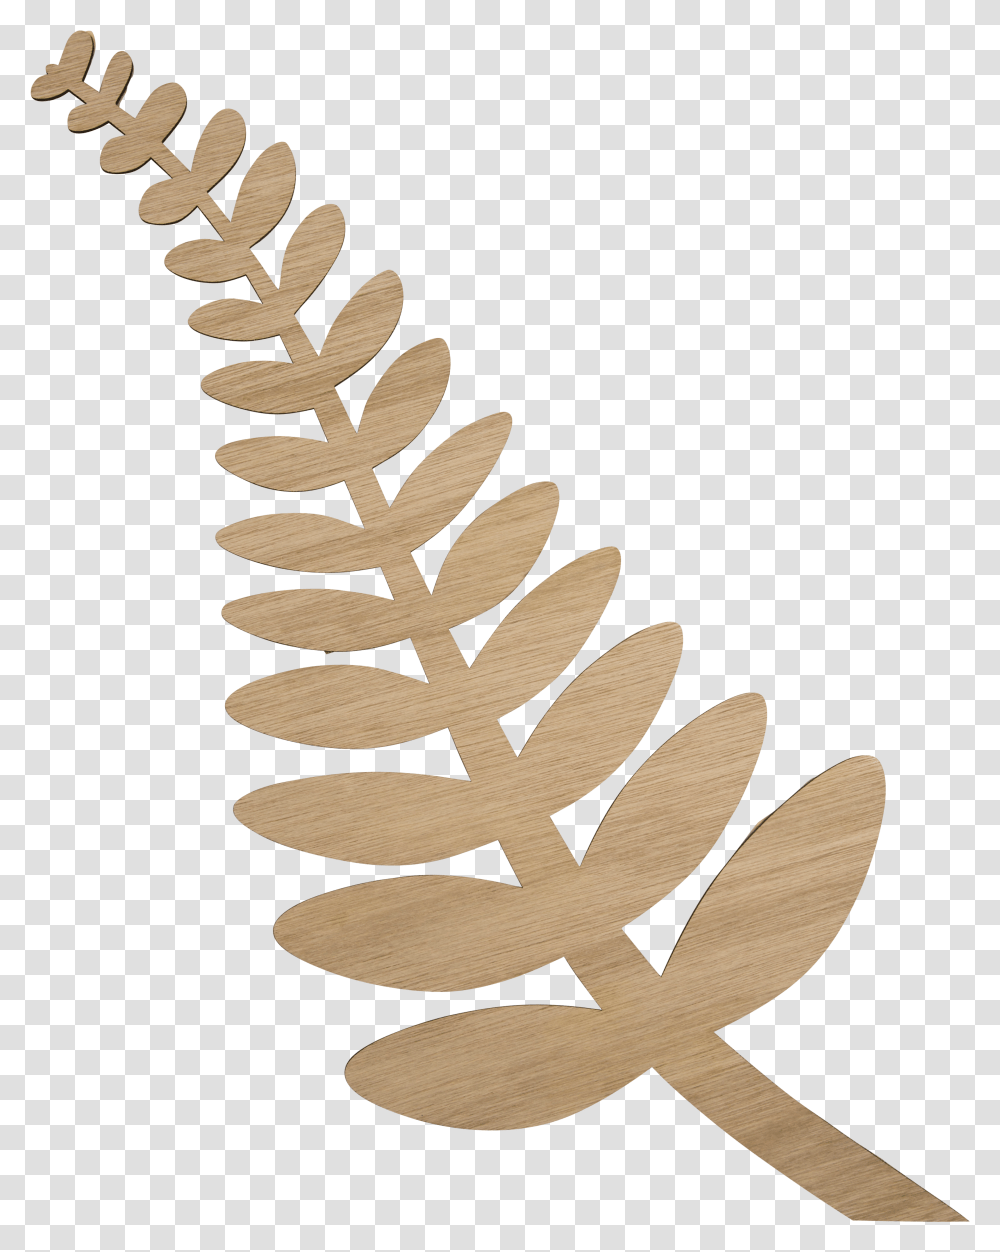 Orn Si Fn Oo Fern Transparent Png